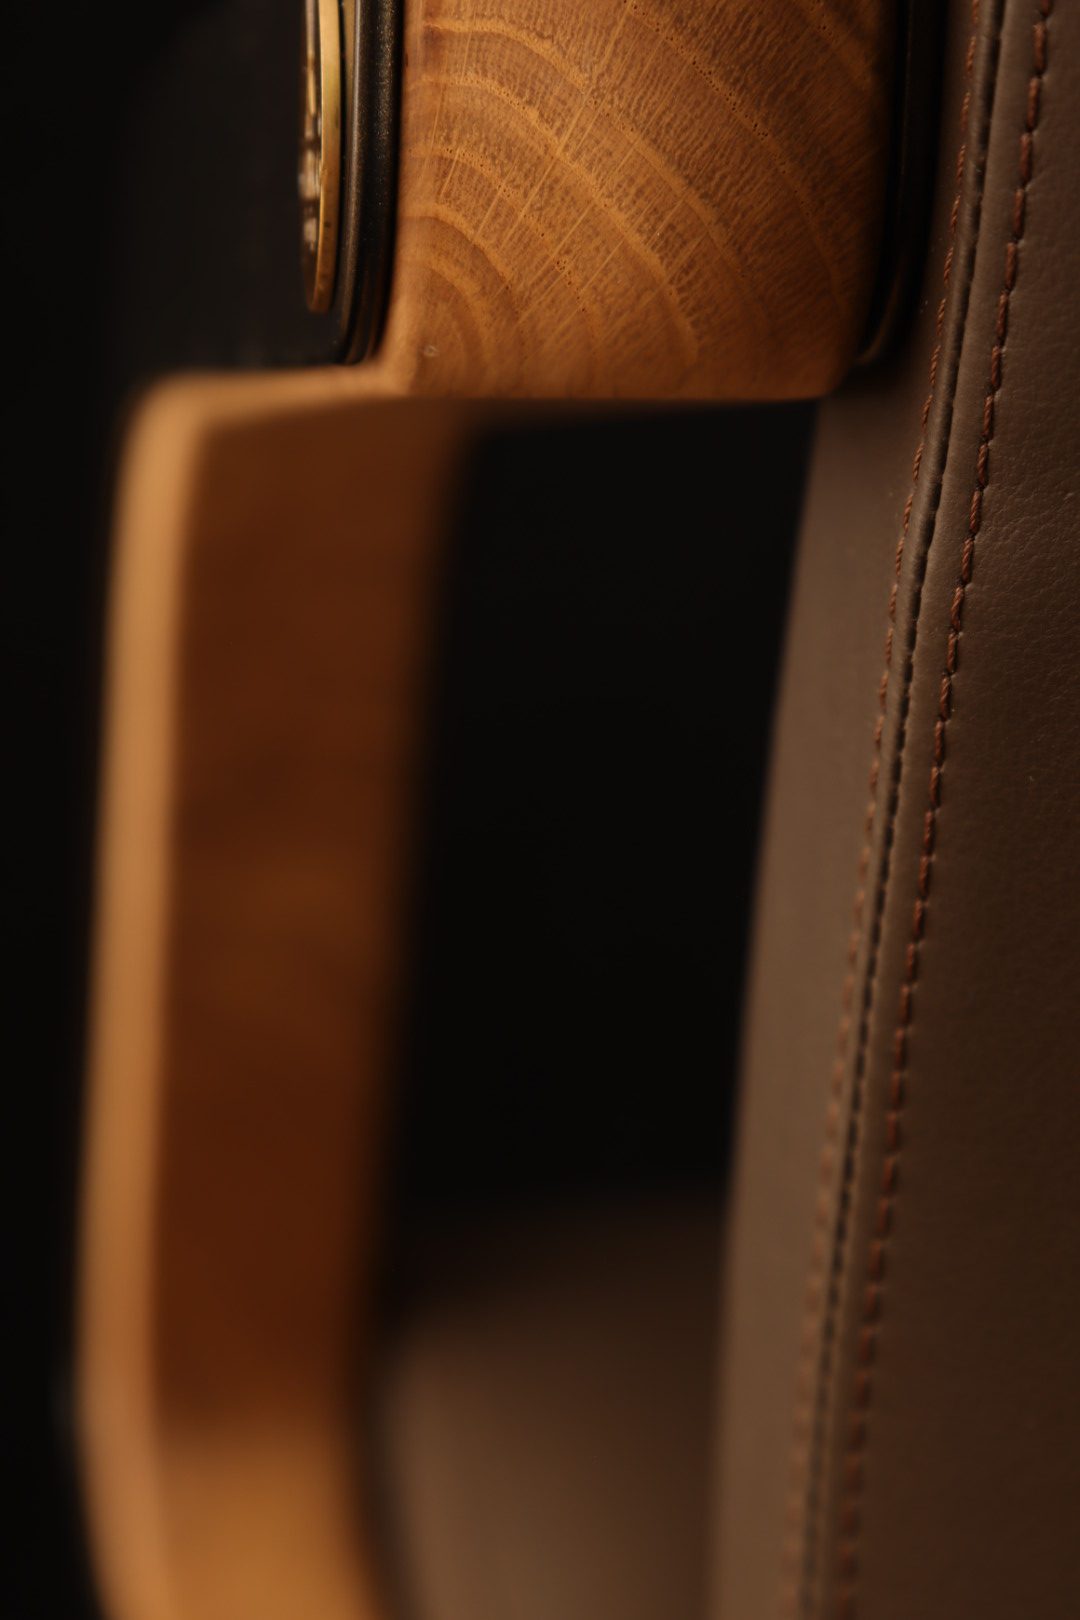 original design in all details of materials of Carlo armchair